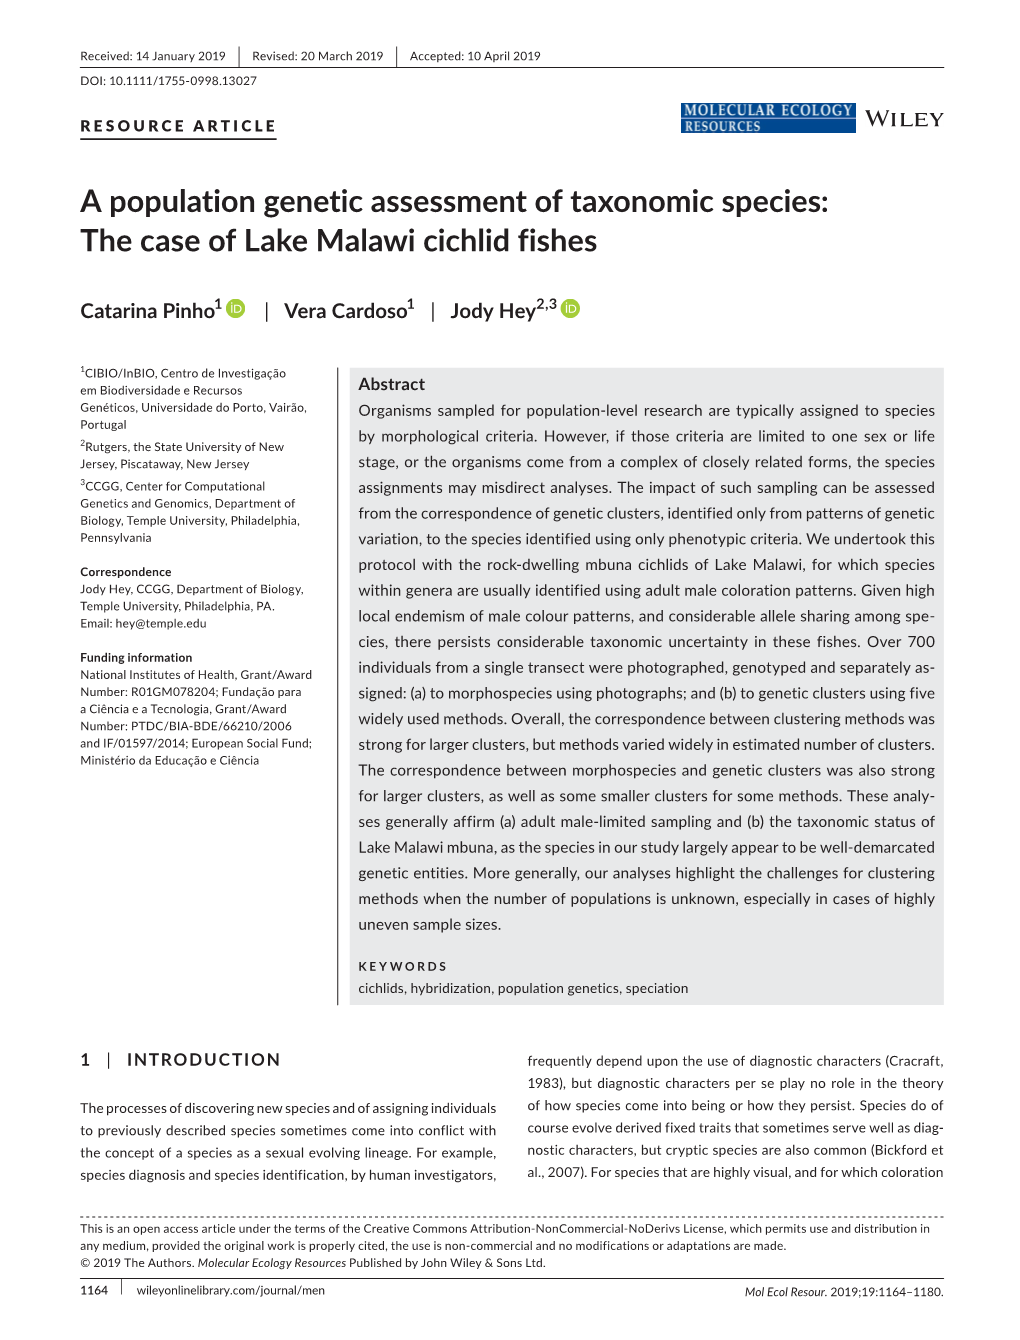 A Population Genetic Assessment of Taxonomic Species: the Case of Lake Malawi Cichlid Fishes